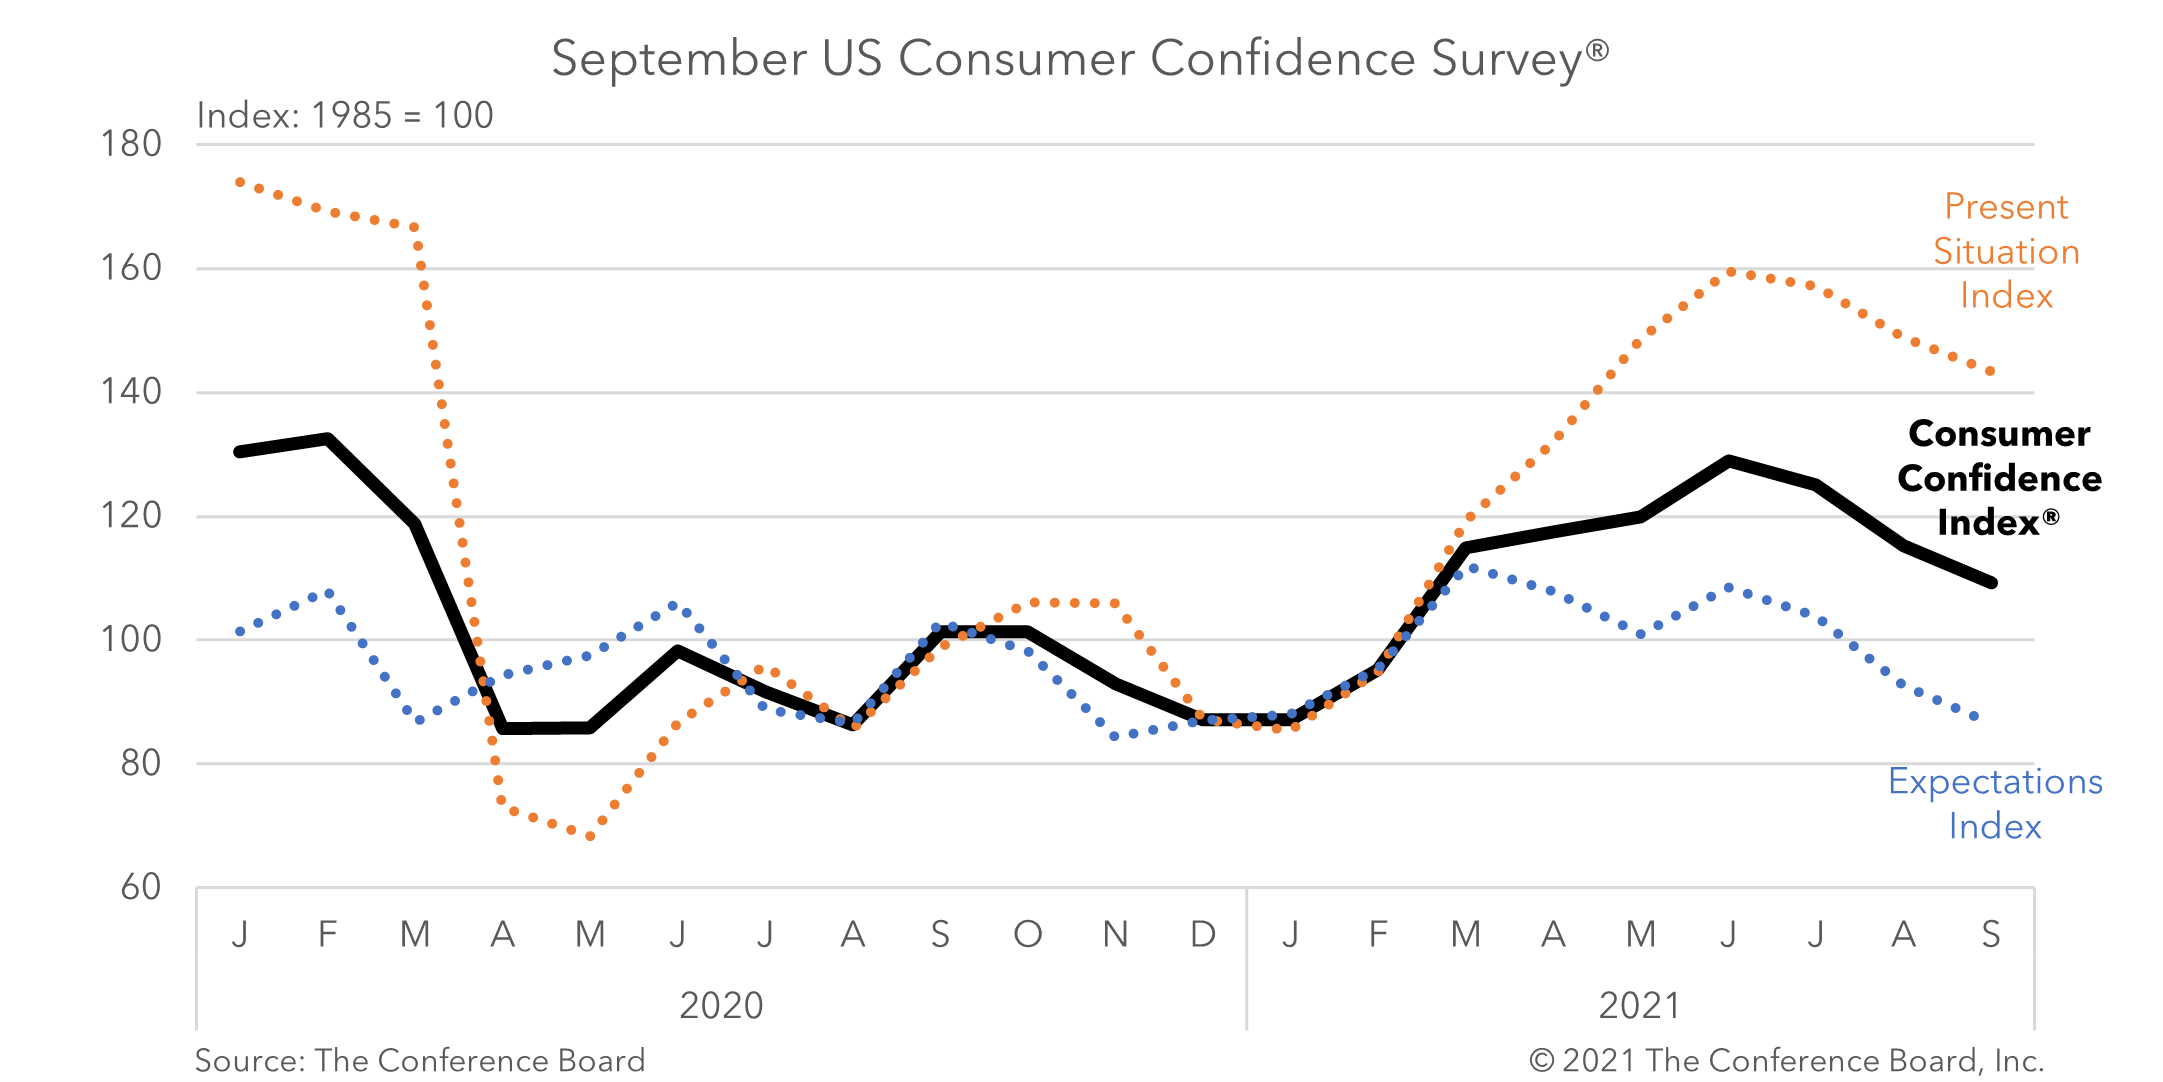 Delta variant continues to erode US consumer confidence